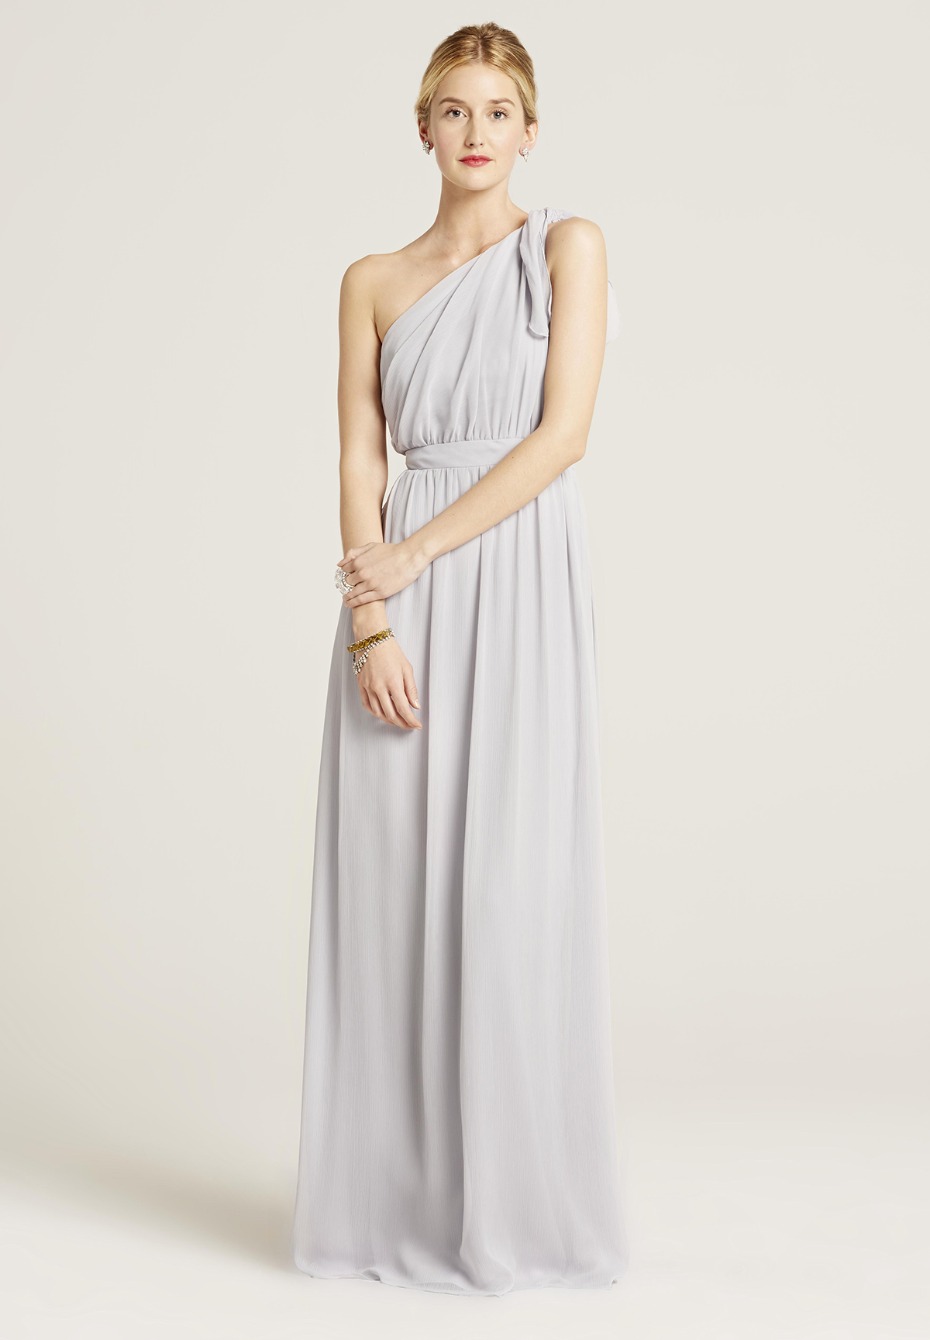 steel grey bridesmaid dress from Union Station